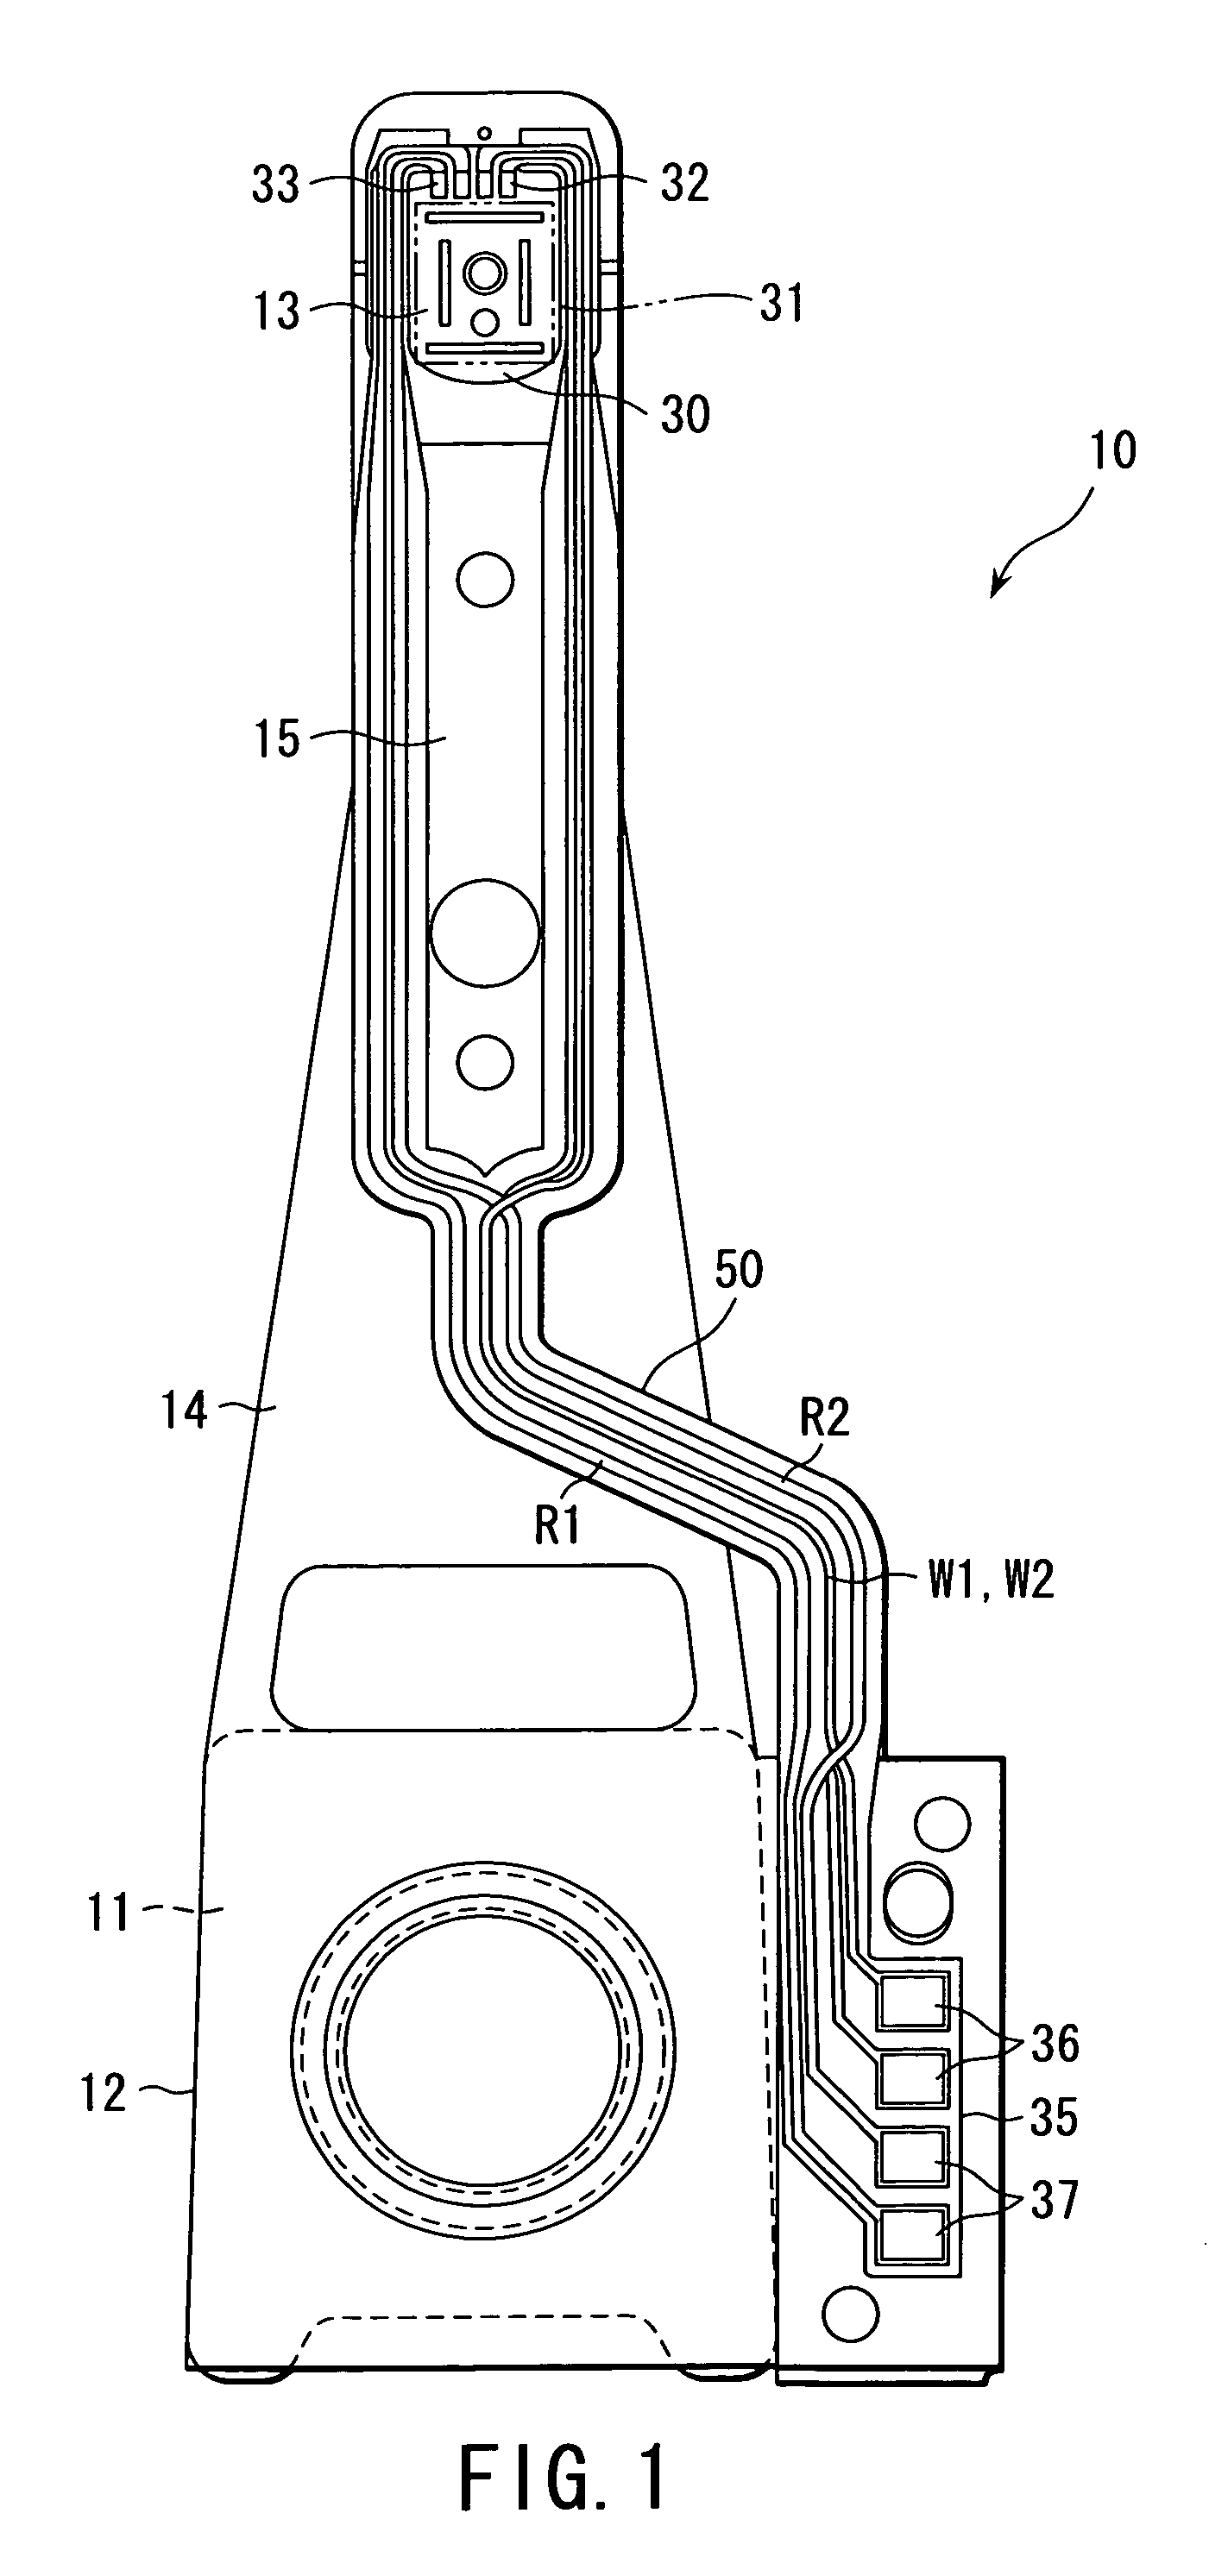 Disc drive suspension including a wired flexure with conductors arranged to reduce crosstalk